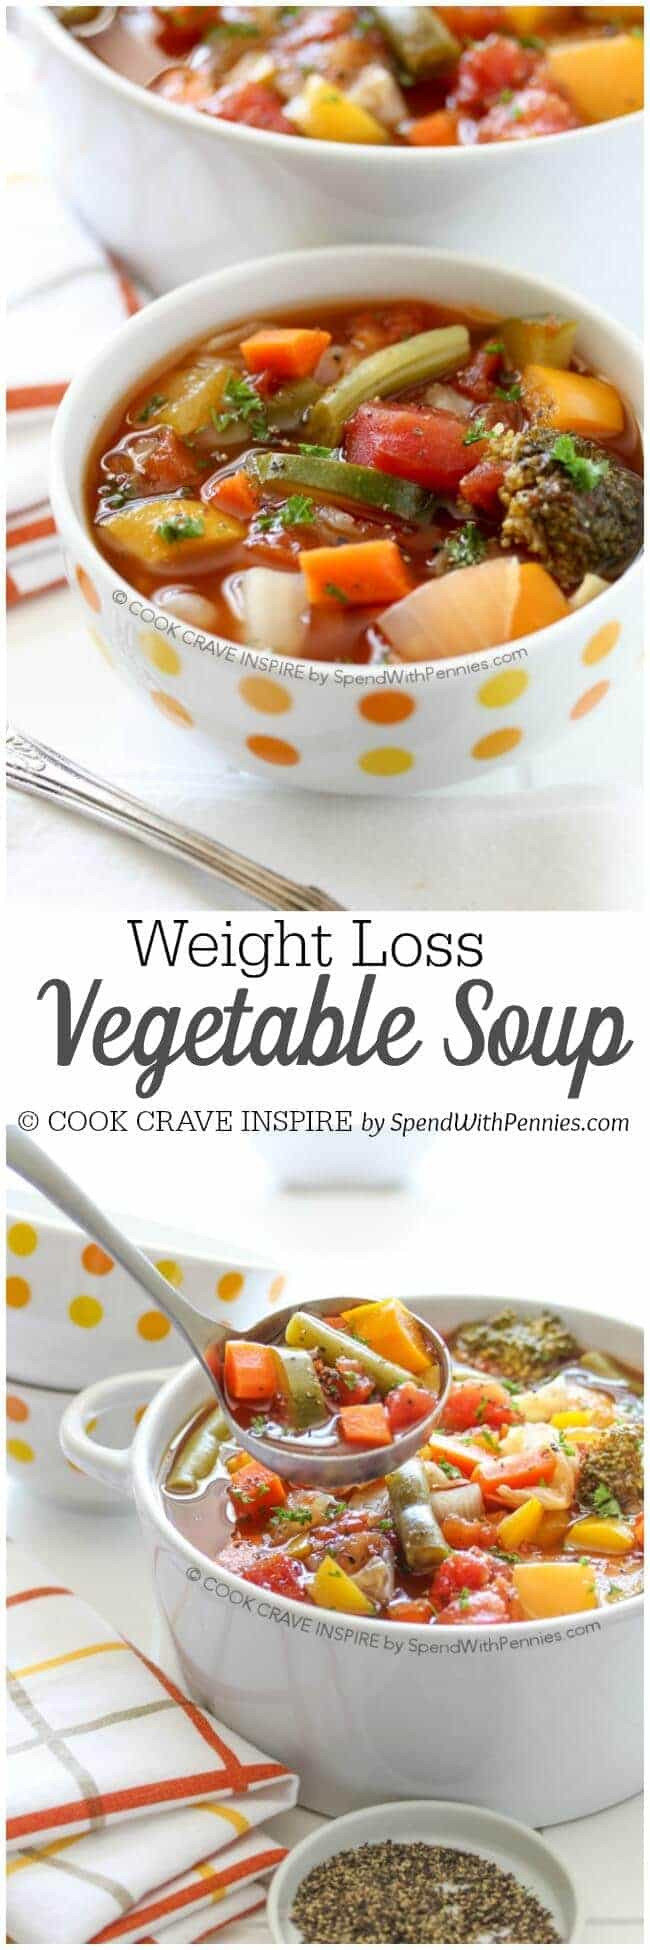 Weight Loss Soup Recipes
 Weight Loss Ve able Soup Recipe Spend With Pennies